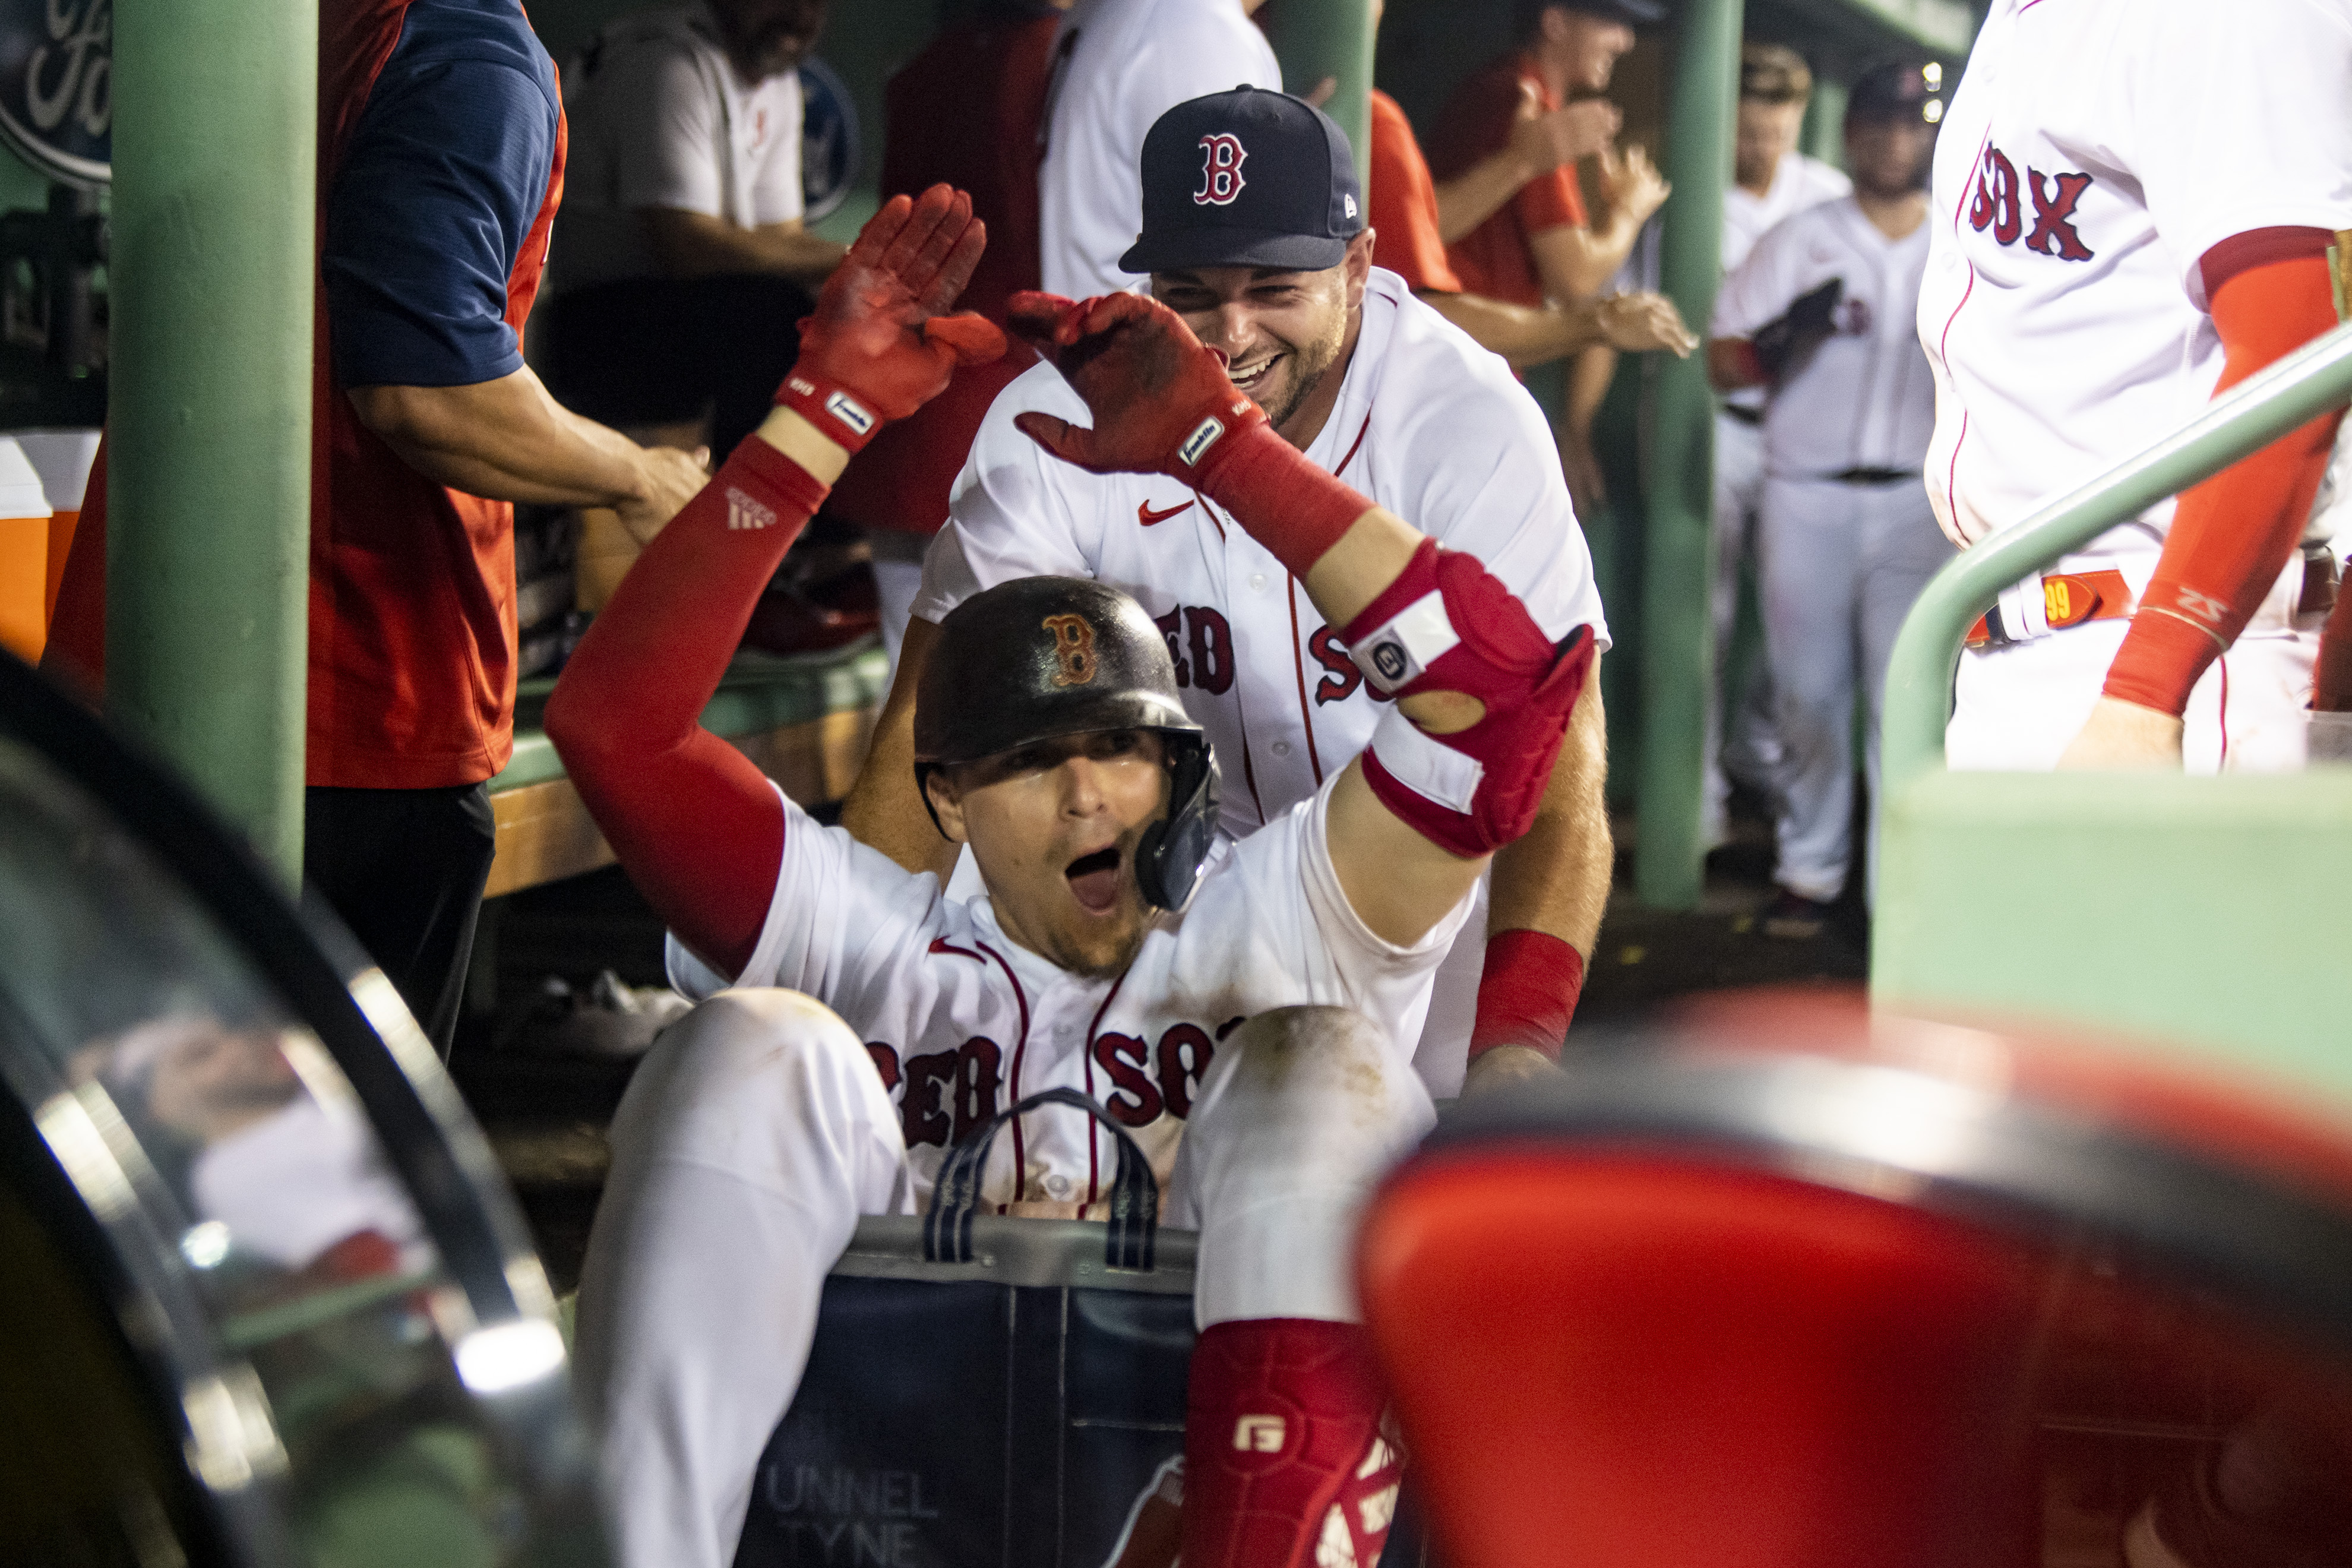 When did home-run celebrations start including funny hats and costume  props? : r/baseball